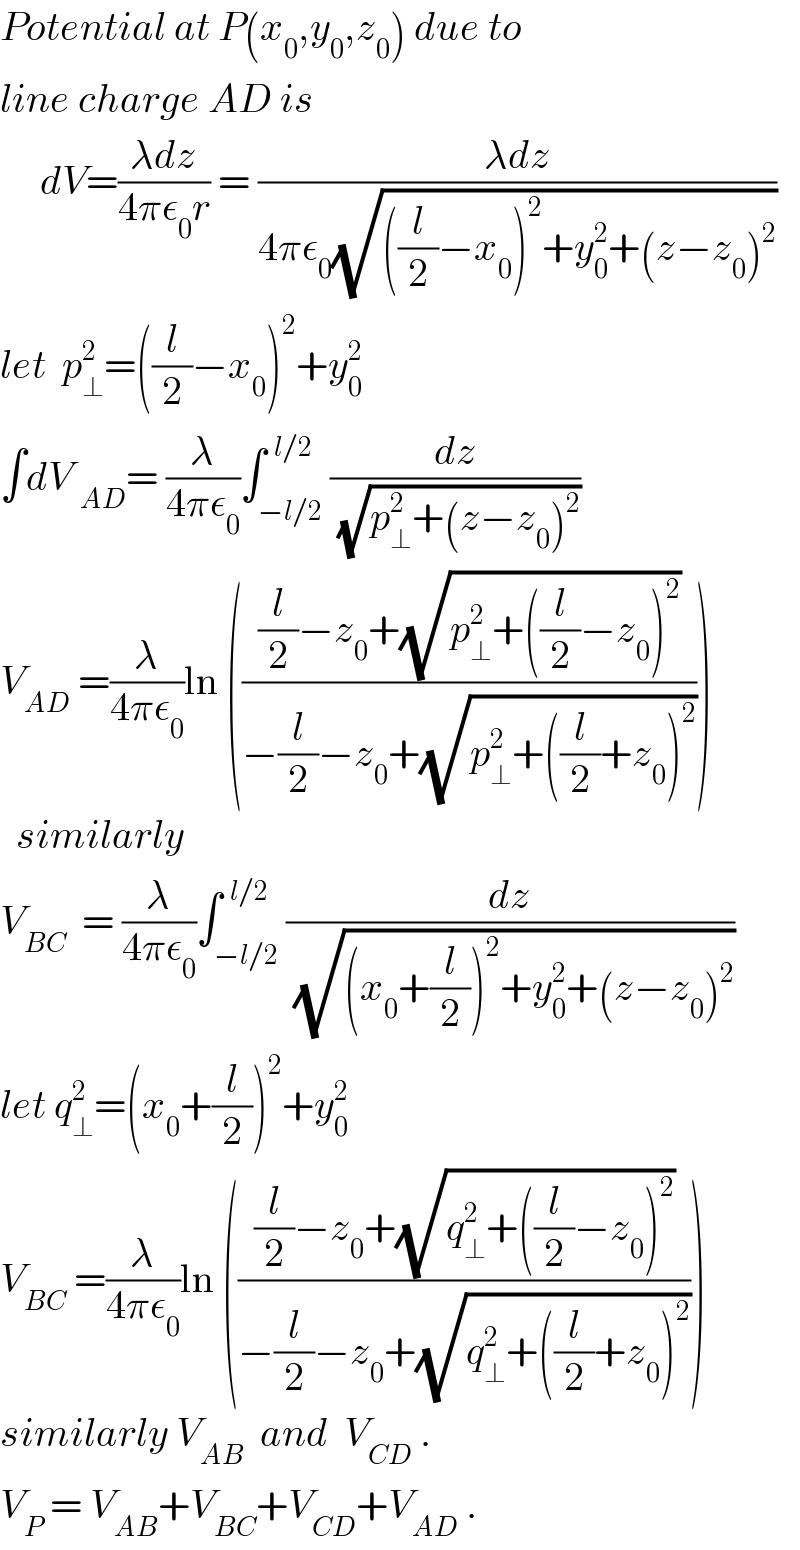 Potential at P(x_0 ,y_0 ,z_0 ) due to  line charge AD is       dV=((λdz)/(4πε_0 r)) = ((λdz)/(4πε_0 (√(((l/2)−x_0 )^2 +y_0 ^2 +(z−z_0 )^2 ))))  let  p_⊥ ^2 =((l/2)−x_0 )^2 +y_0 ^2    ∫dV _(AD) = (λ/(4πε_0 ))∫_(−l/2) ^(  l/2) (dz/(√(p_⊥ ^2 +(z−z_0 )^2 )))  V_(AD)  =(λ/(4πε_0 ))ln ((((l/2)−z_0 +(√(p_⊥ ^2 +((l/2)−z_0 )^2 )))/(−(l/2)−z_0 +(√(p_⊥ ^2 +((l/2)+z_0 )^2 )))))    similarly  V_(BC)   = (λ/(4πε_0 ))∫_(−l/2) ^(  l/2) (dz/(√((x_0 +(l/2))^2 +y_0 ^2 +(z−z_0 )^2 )))  let q_⊥ ^2 =(x_0 +(l/2))^2 +y_0 ^2   V_(BC)  =(λ/(4πε_0 ))ln ((((l/2)−z_0 +(√(q_⊥ ^2 +((l/2)−z_0 )^2 )))/(−(l/2)−z_0 +(√(q_⊥ ^2 +((l/2)+z_0 )^2 )))))  similarly V_(AB)   and  V_(CD)  .  V_P  = V_(AB) +V_(BC) +V_(CD) +V_(AD)  .  